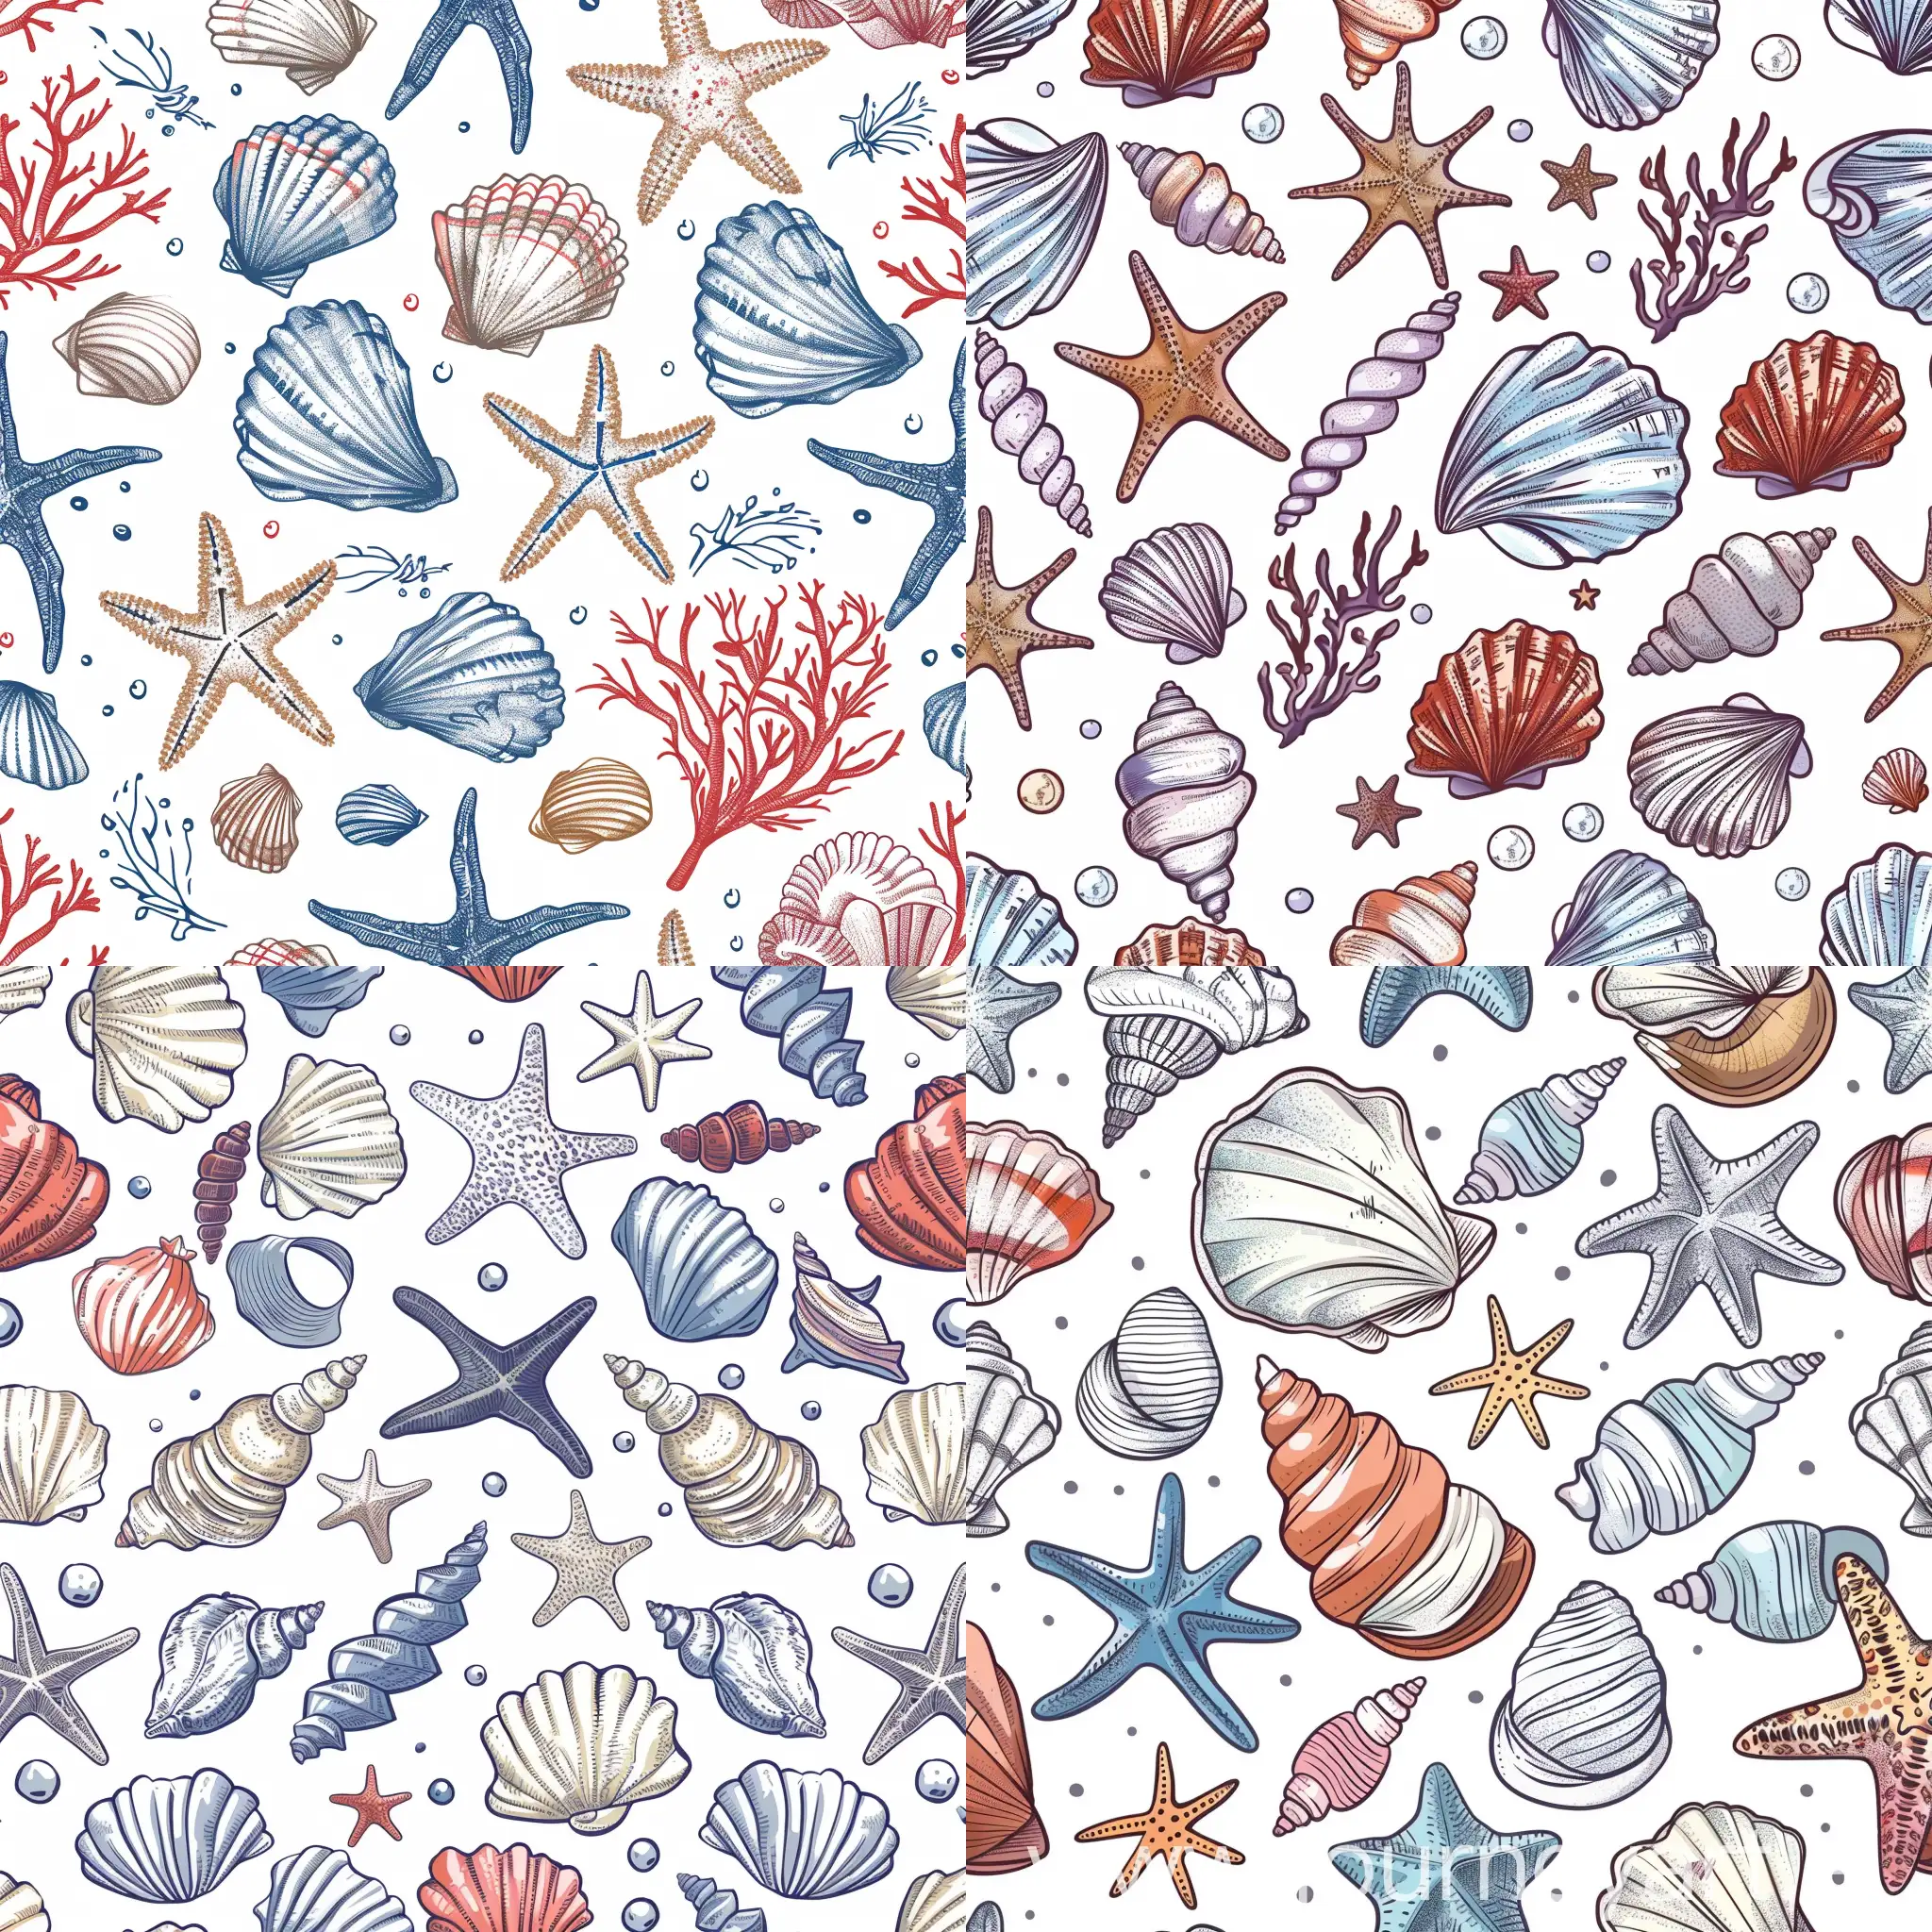 pattern design of Beachside ambiance - nautical-themed decor with seashell objects, sea stars and corals image, in high quality handdrawing style